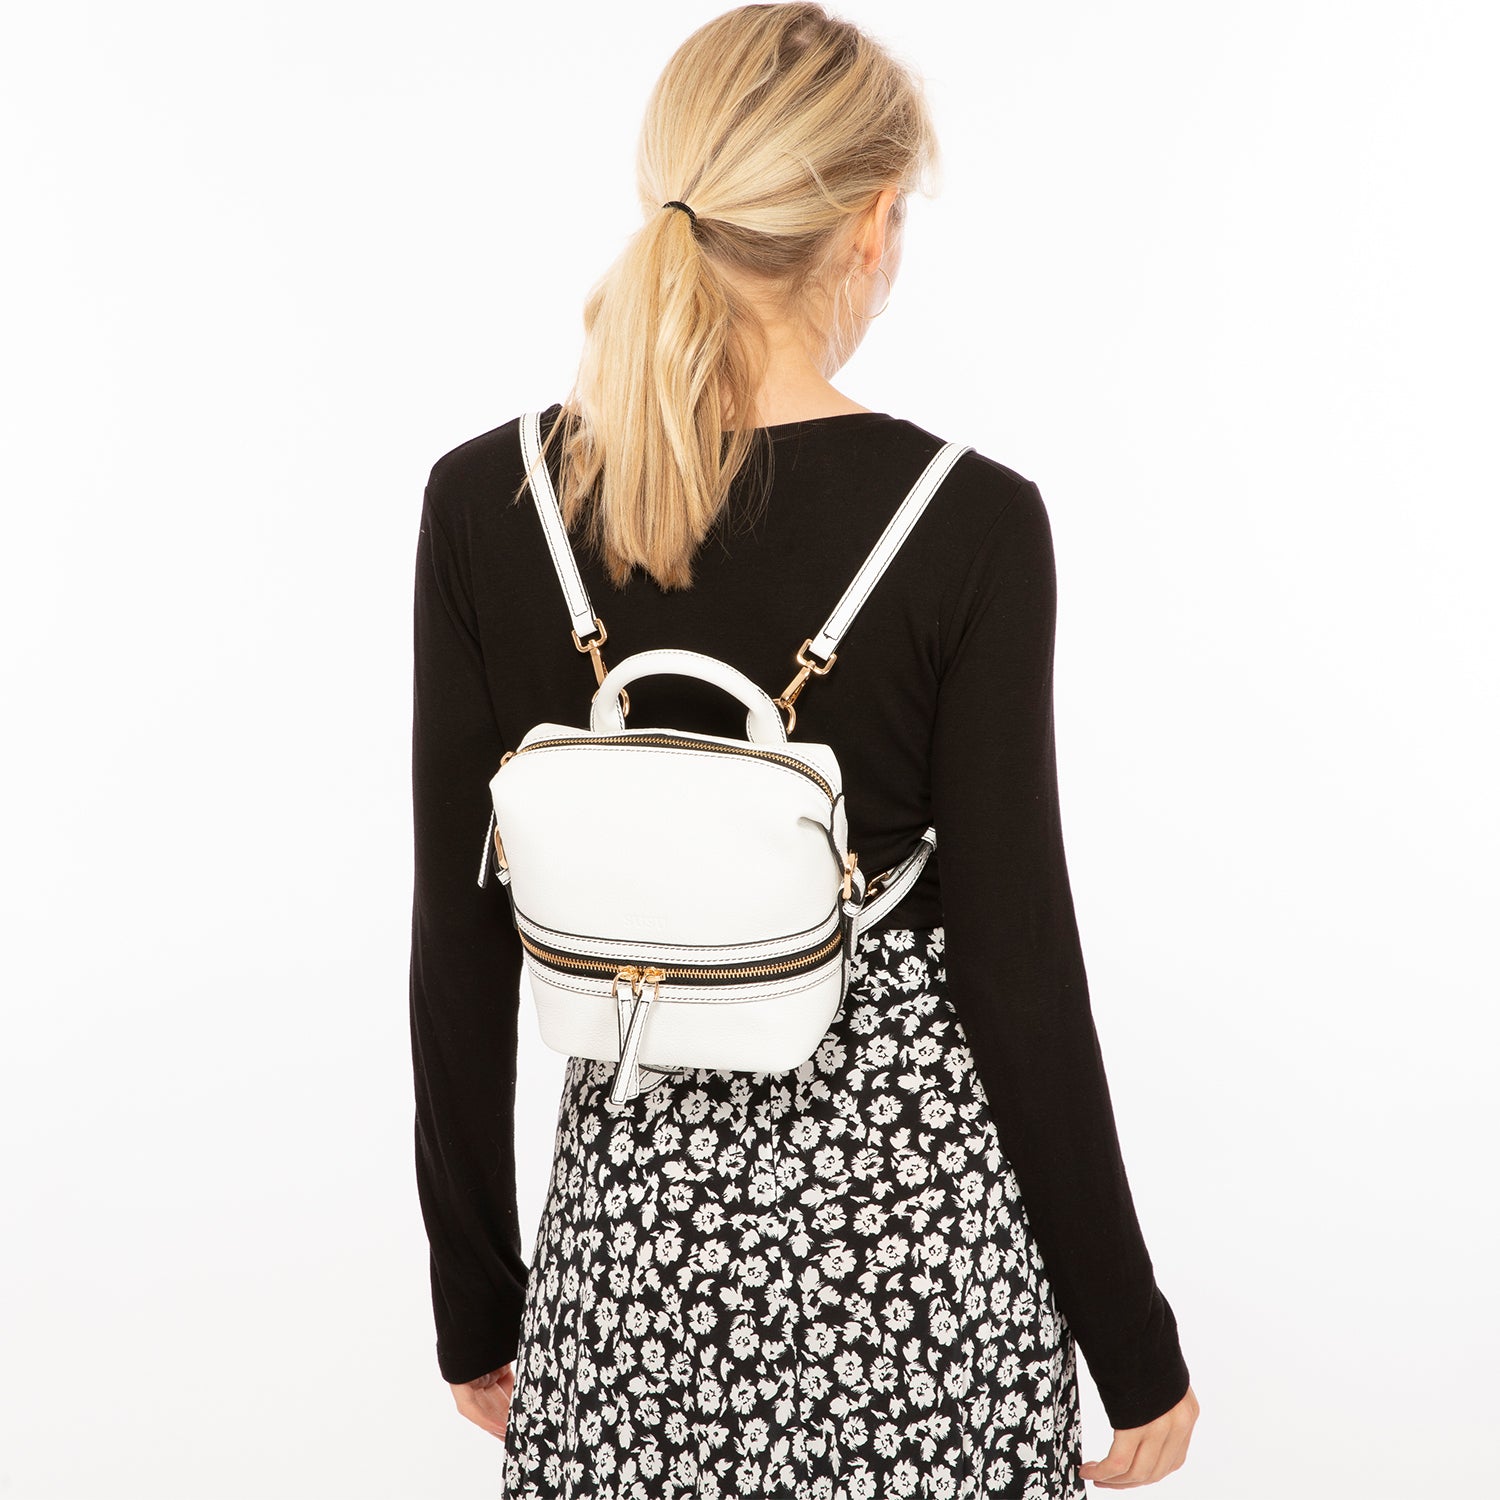 Introducing the Ashley Small White Leather Backpack Purse - The Perfect Blend of Style and Functionality